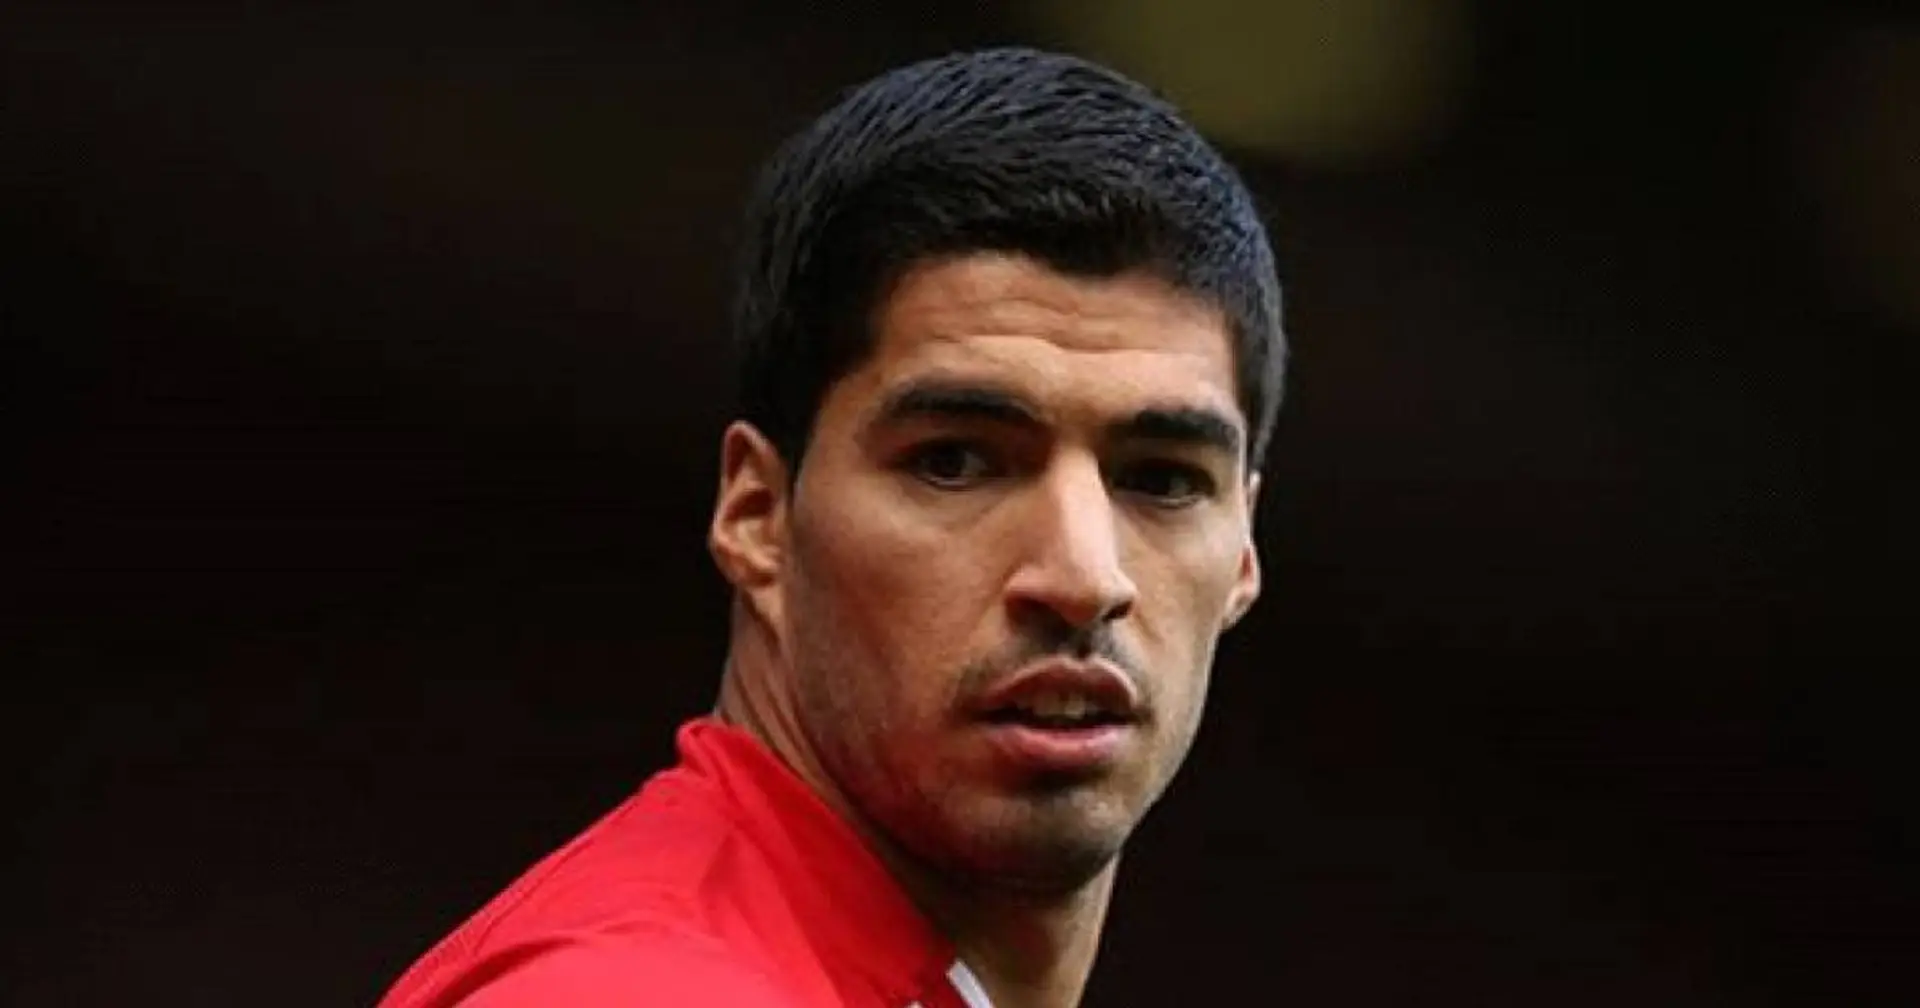 'Suddenly that £40m release clause looked far too low': Arsenal fan slams Liverpool for lying to Suarez in 2013